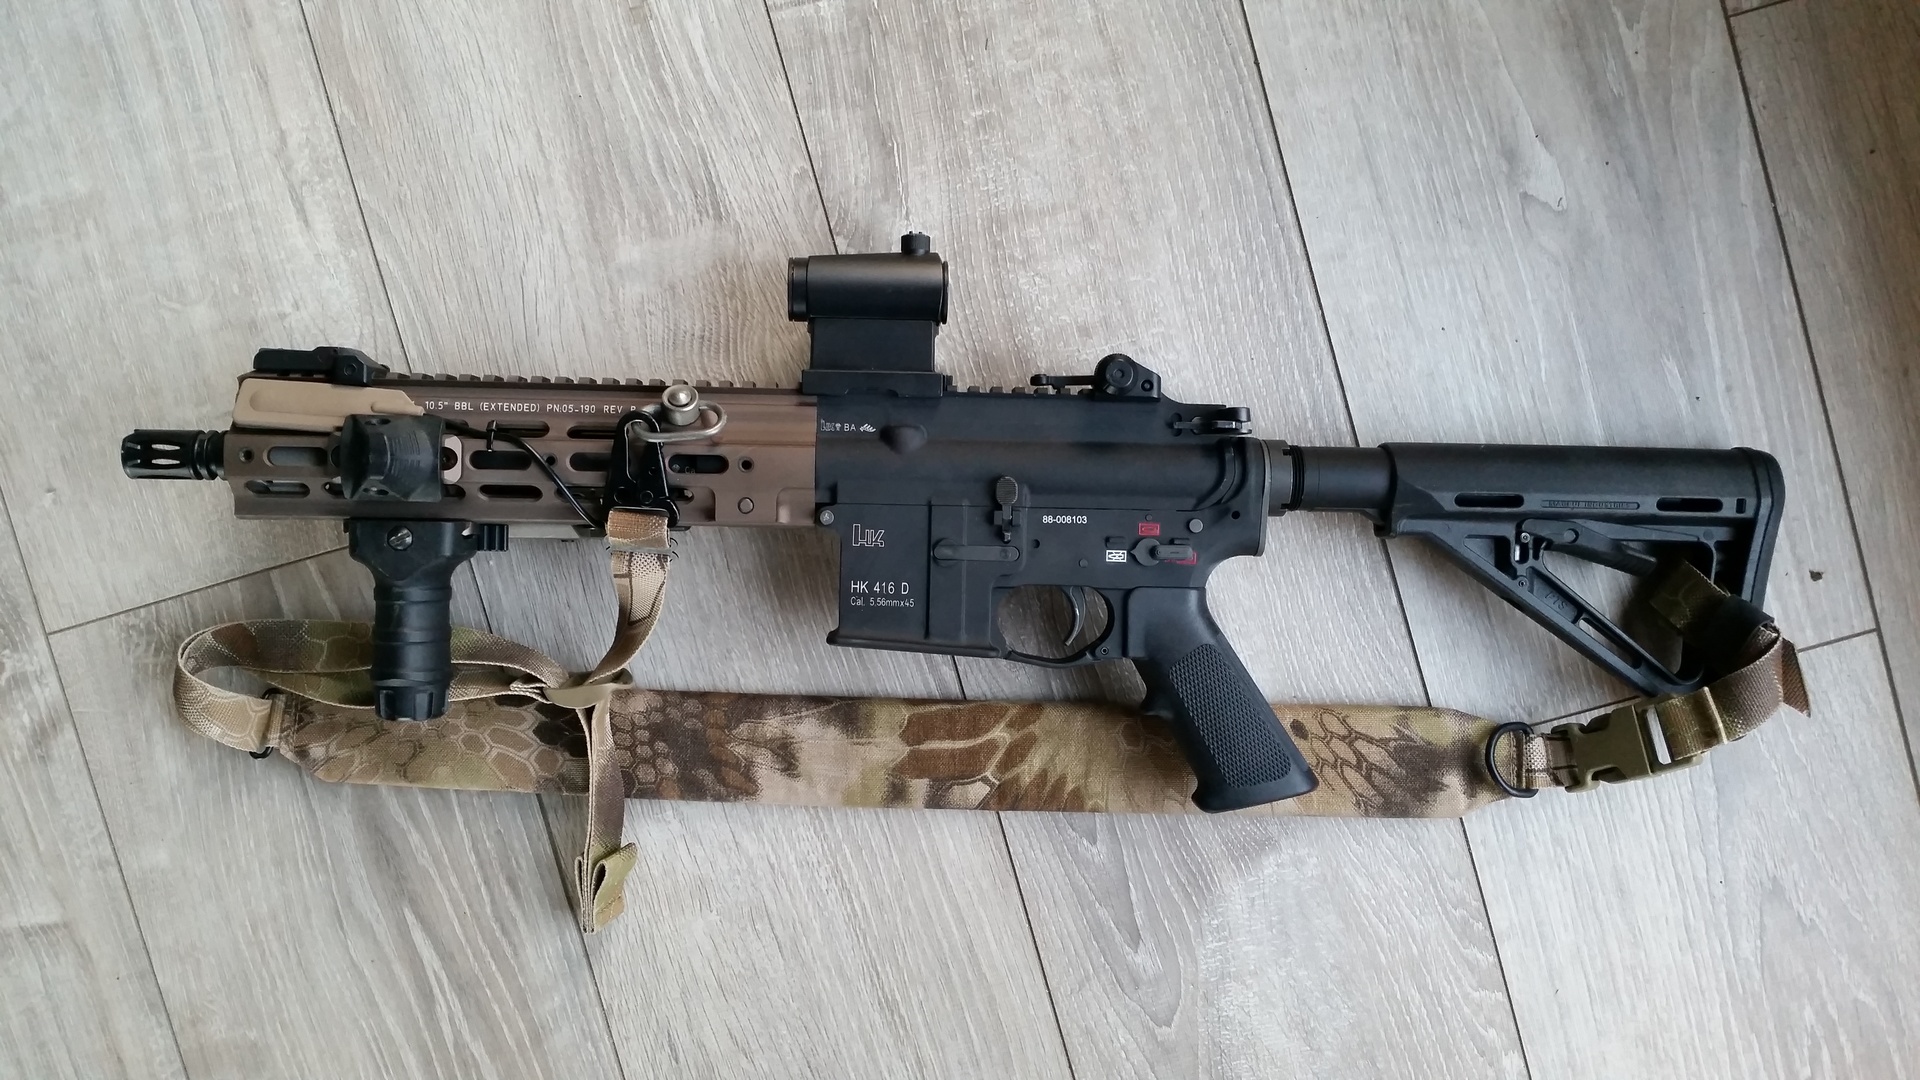 Systema PTW hk 416.